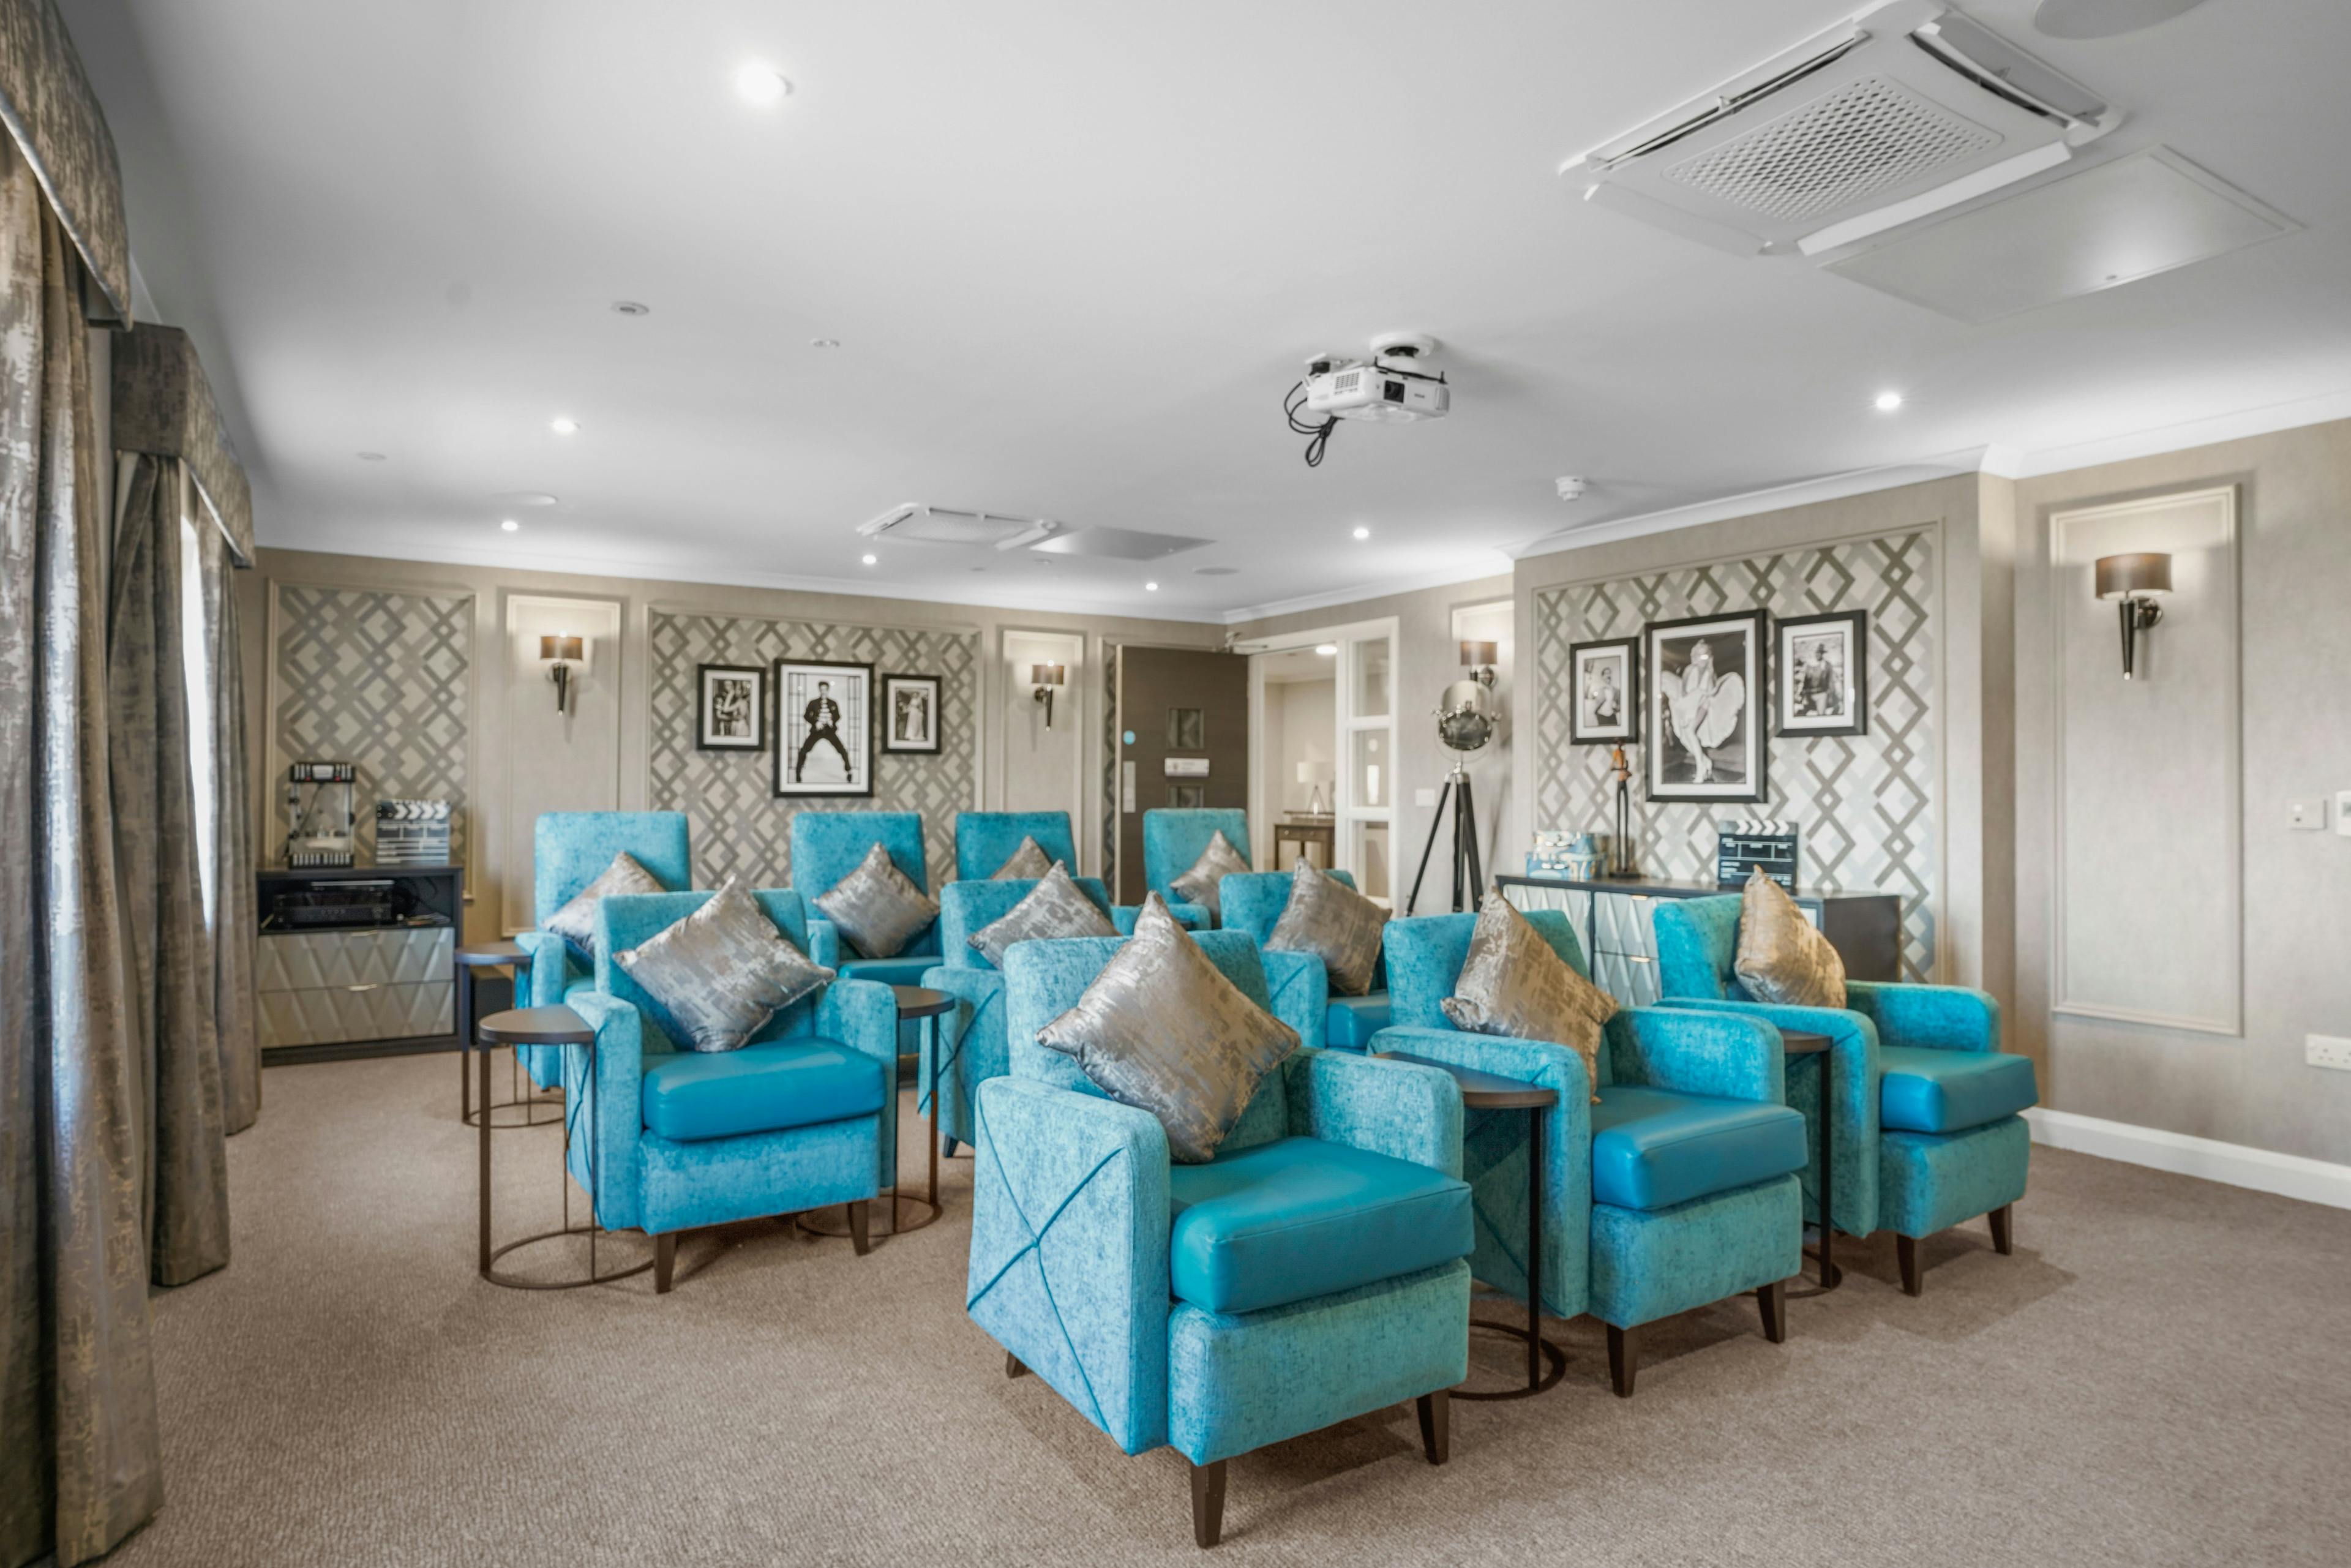 Cinema of Avocet House care home in Boston, Lincolnshire